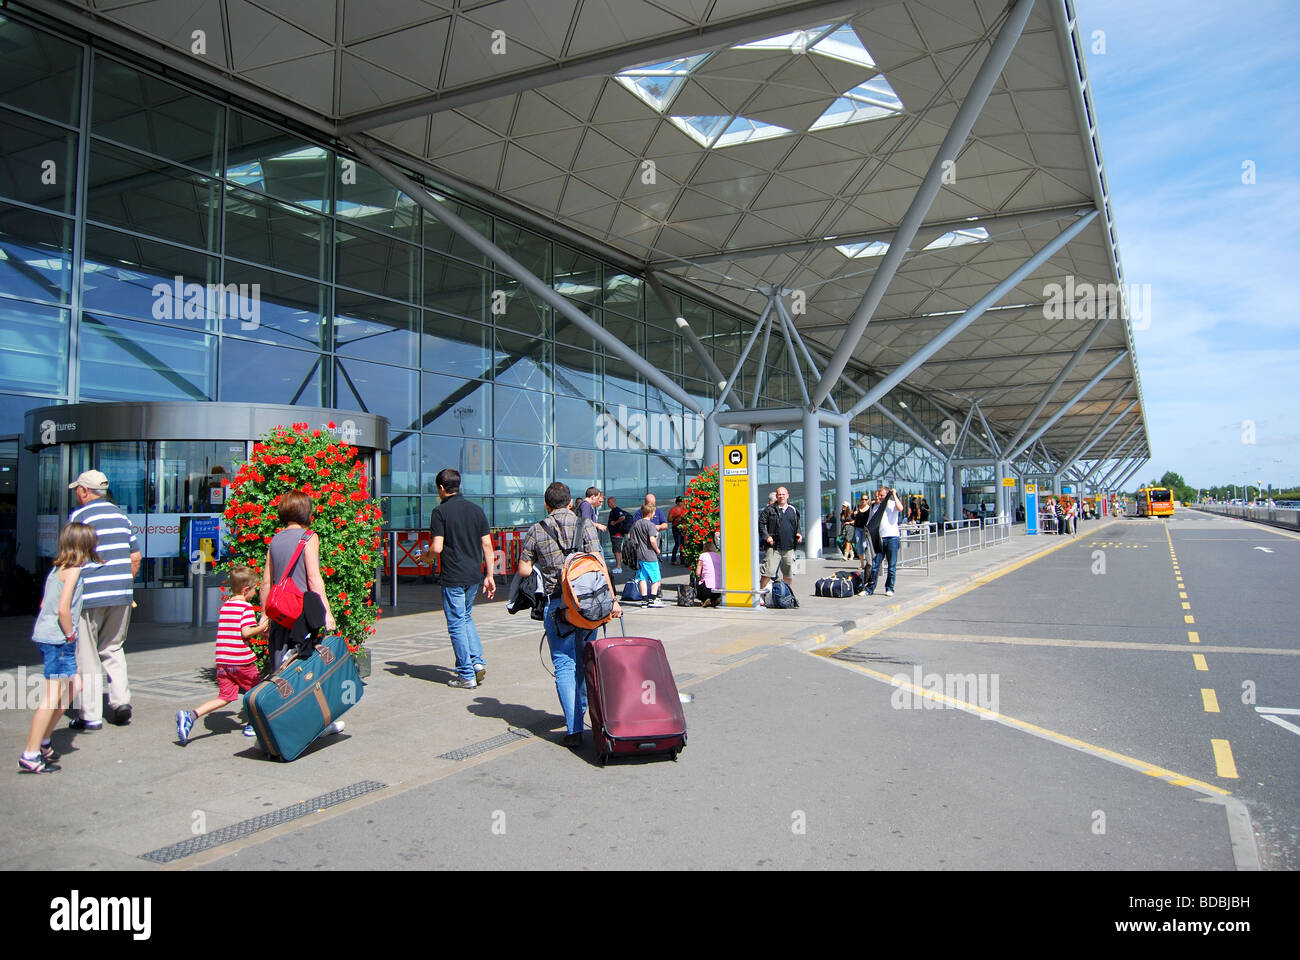 Terminal Departure level, London Stansted Airport, Stansted Mountfitchet, Essex, England, United Kingdom Stock Photo